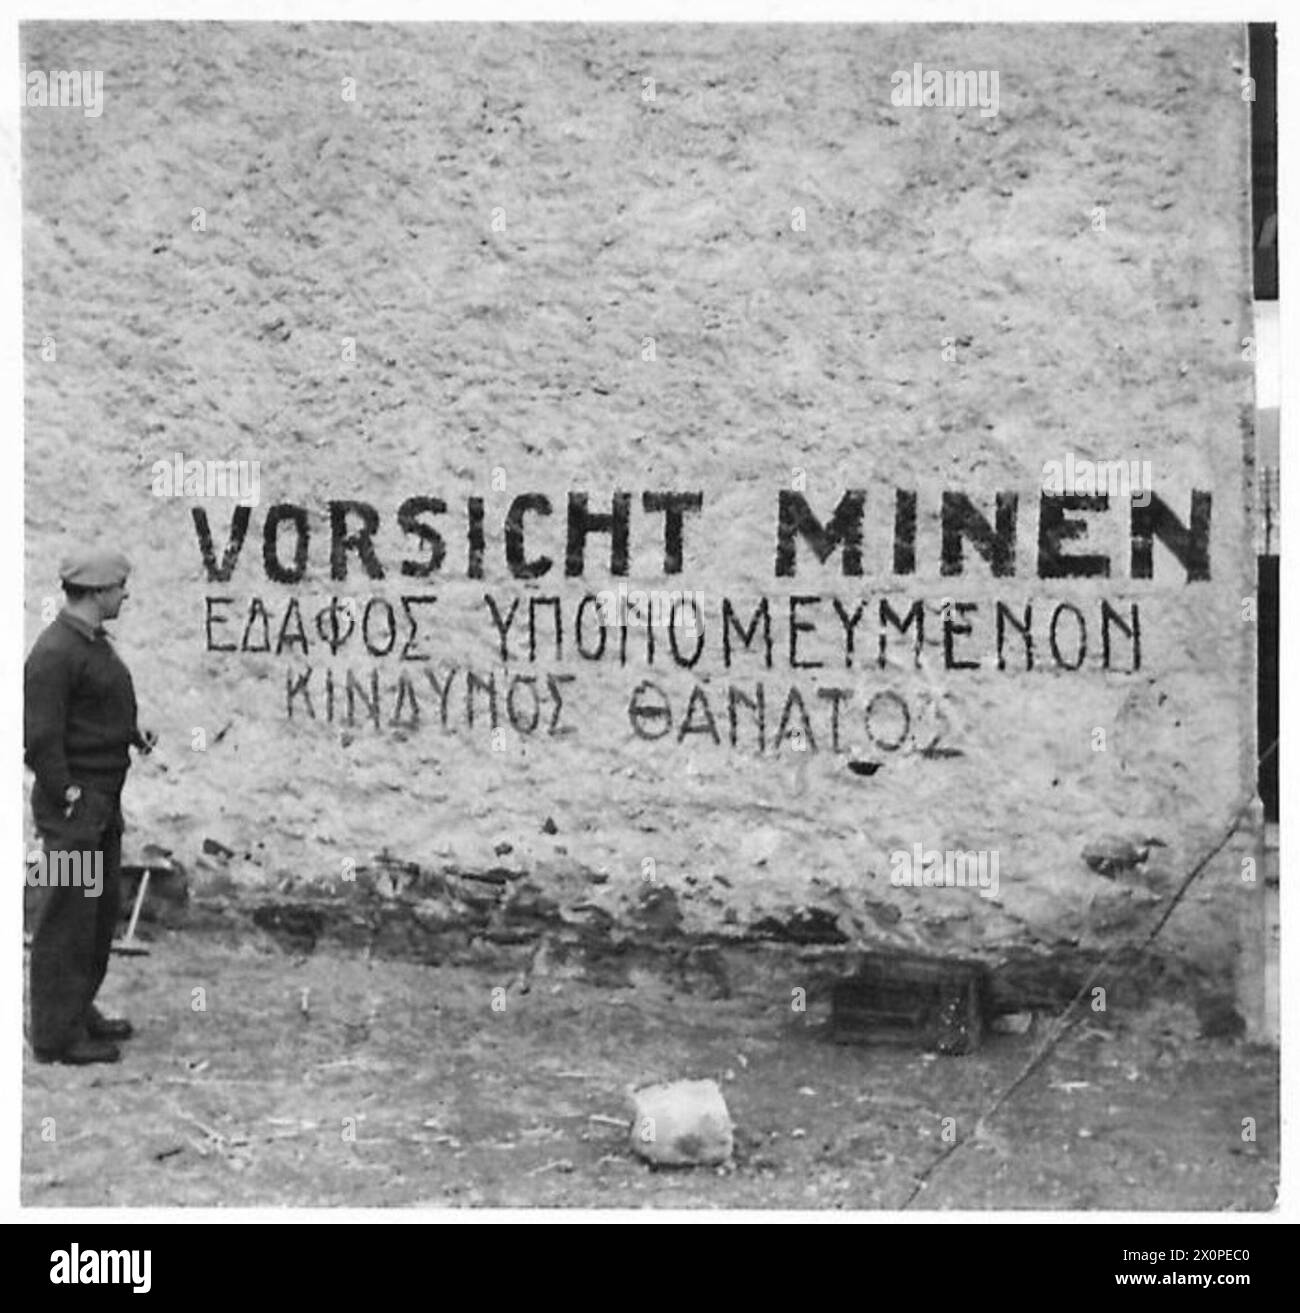 AEGEAN ISLANDS REOCCUPIED BY ALLIED FORCESTHE ISLAND OF KHIOS - CSM George Simmons of Maida Vale, London, who served in Greece in 1941, looks at one of the many mine warnings painted on the sides of buildings. Photographic negative , British Army Stock Photo